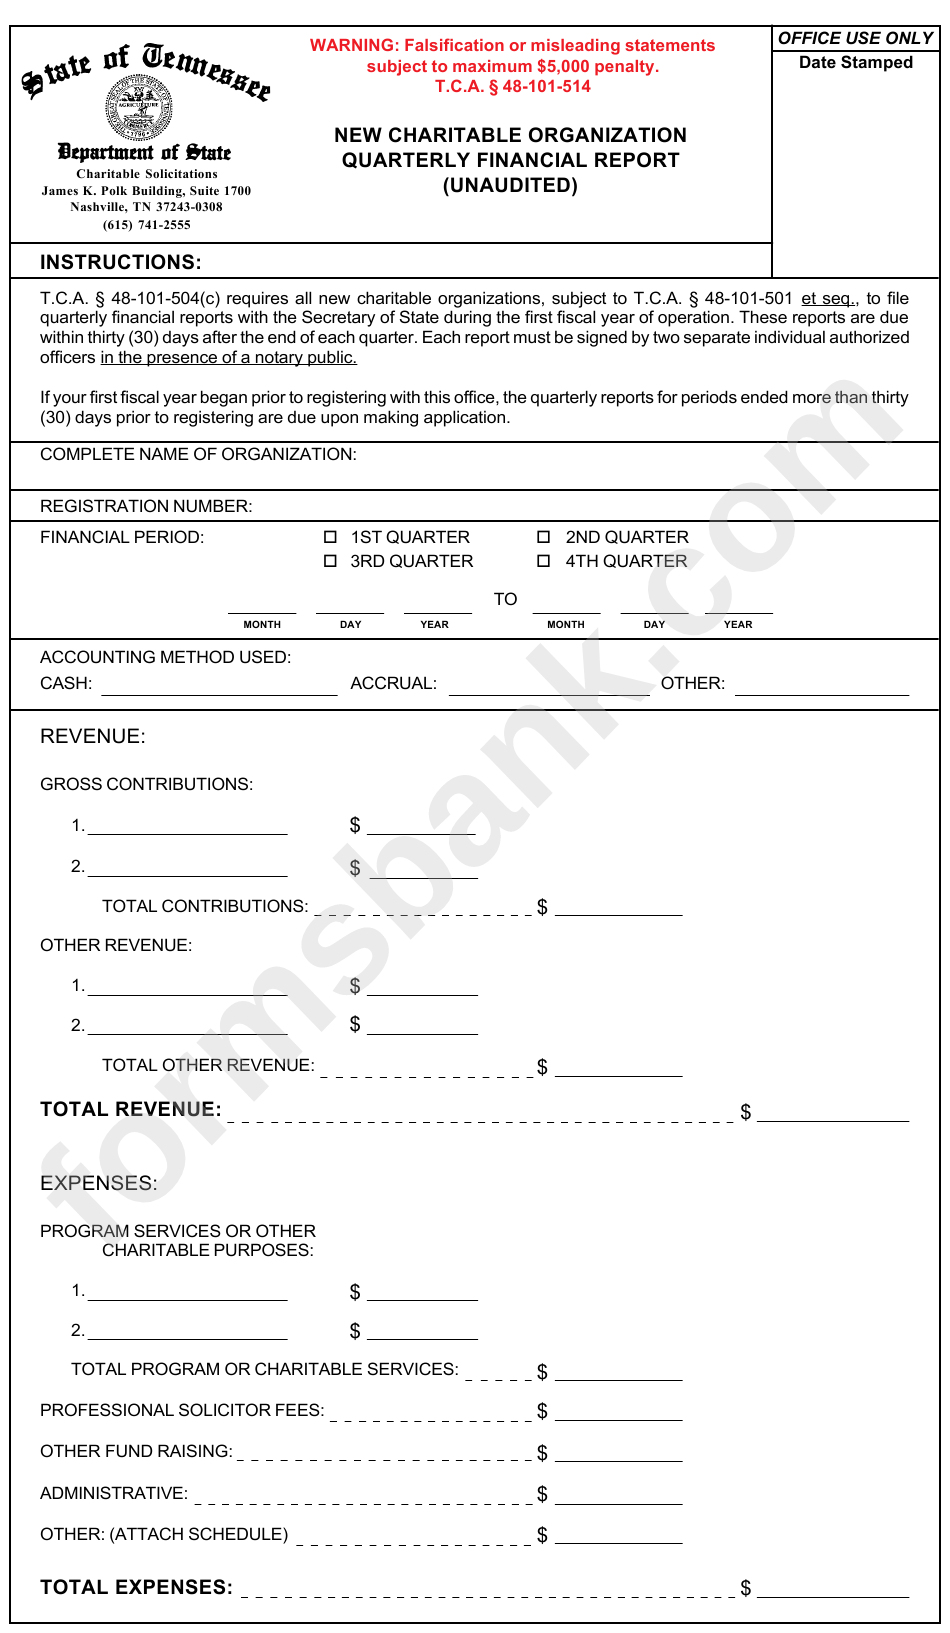 Form Ss-6039 - New Charitable Organization Quarterly Financial Report (Unaudited)